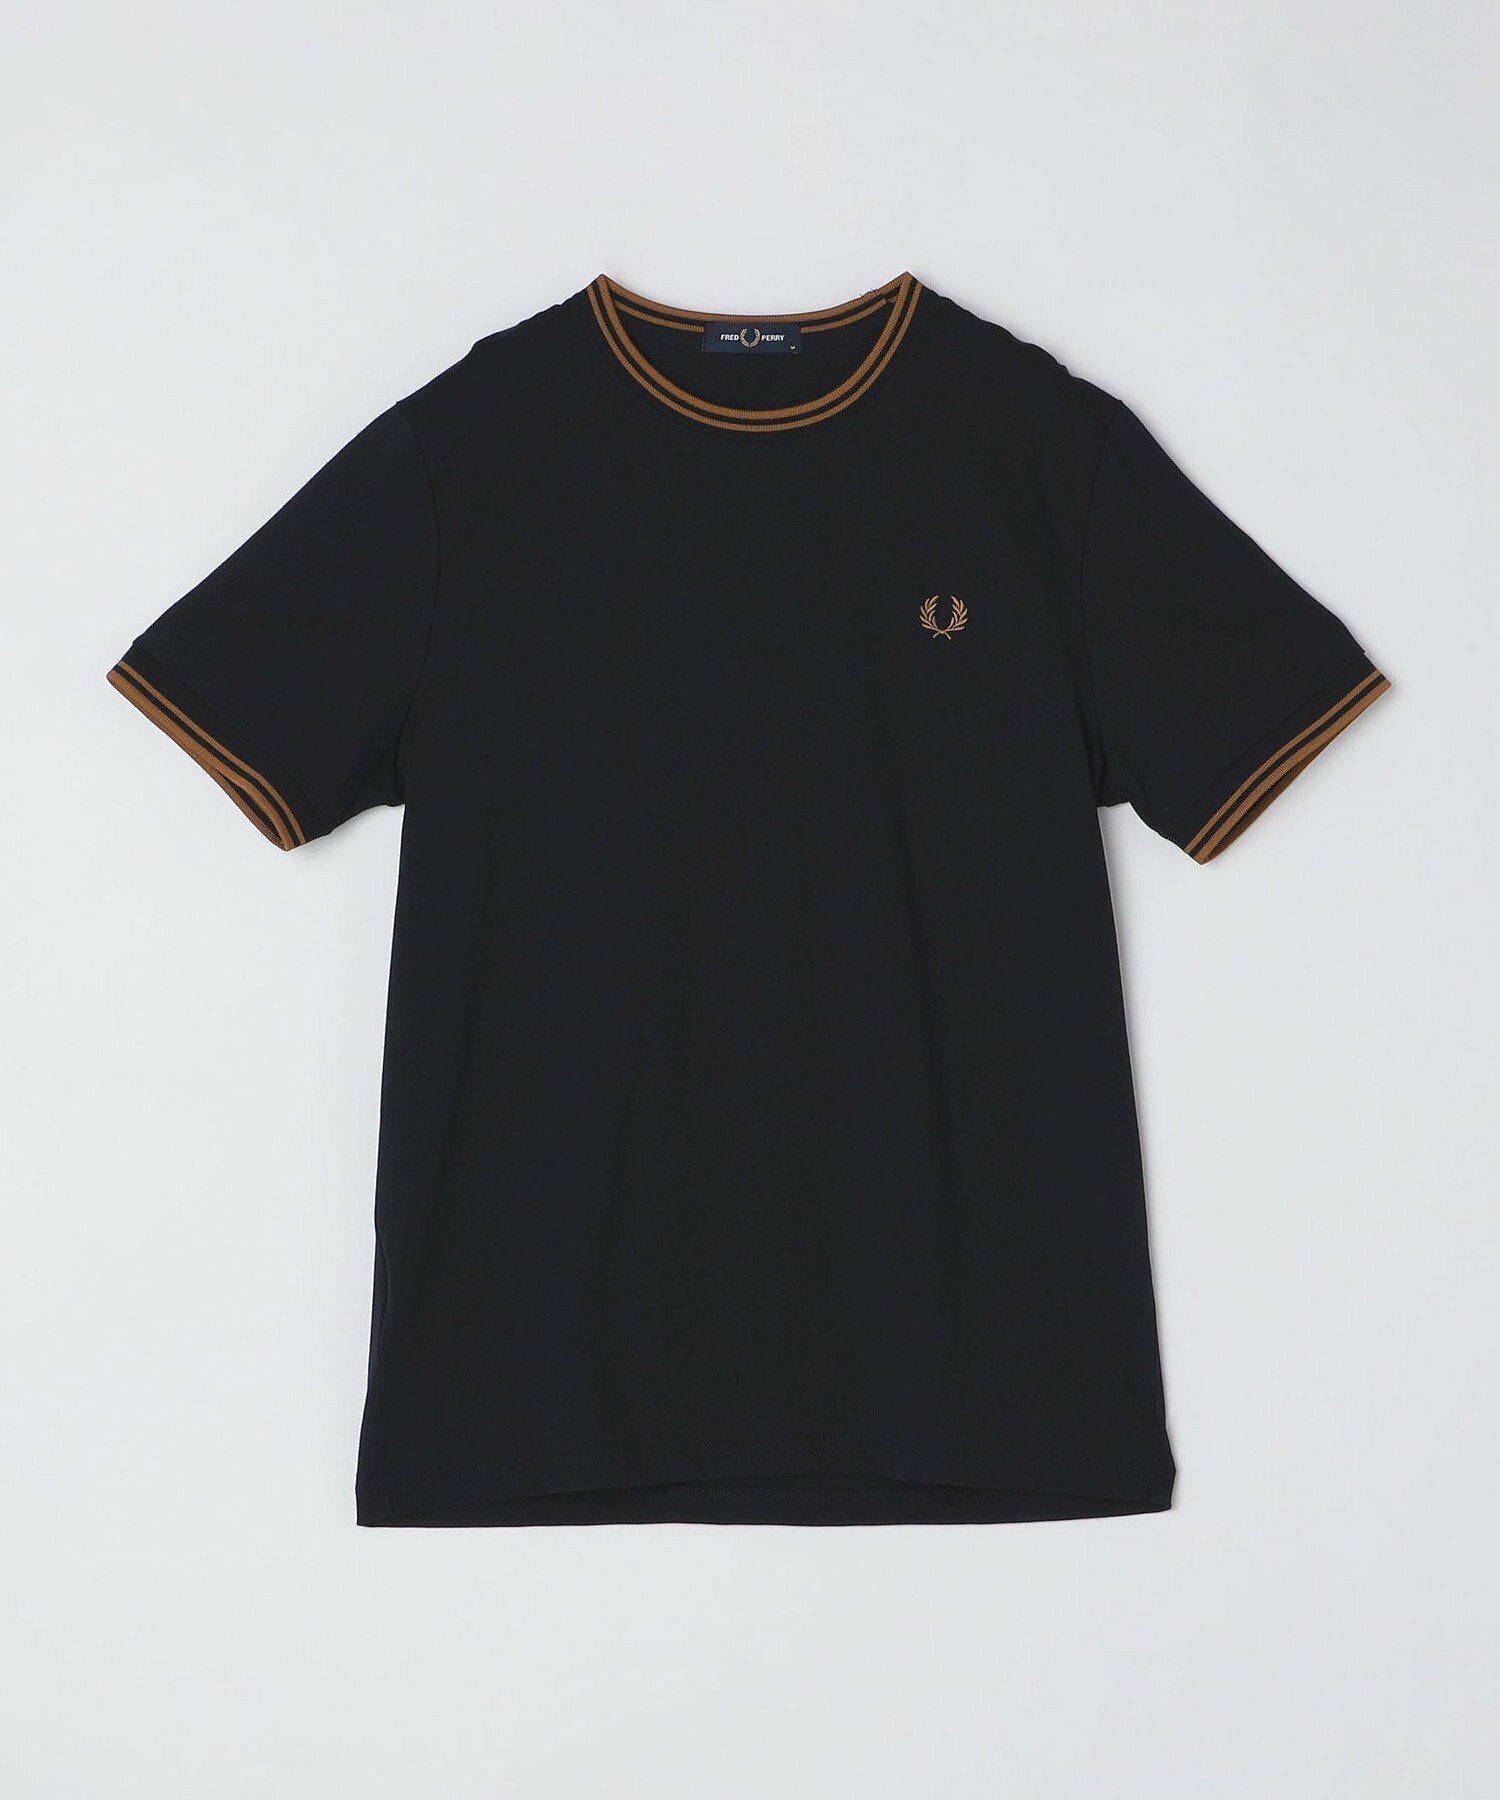 FRED PERRY: TWIN TIPPED Tシャツ